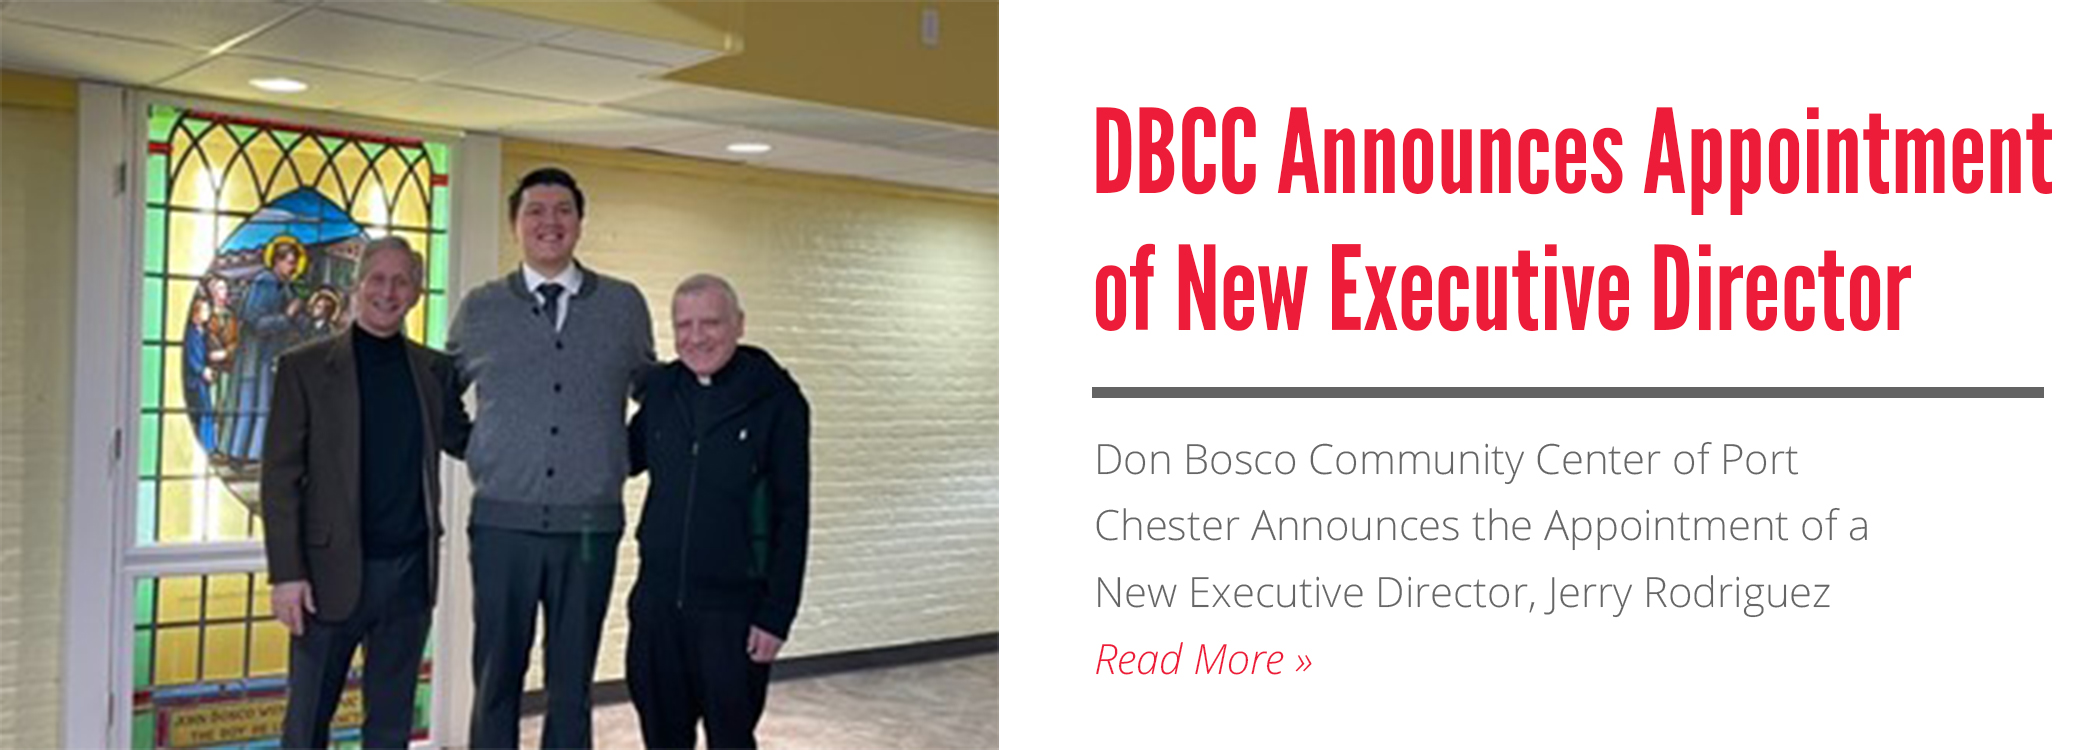 DON BOSCO COMMUNITY CENTER OF PORT CHESTER ANNOUNCES THE APPOINTMENT OF A NEW EXECUTIVE DIRECTOR